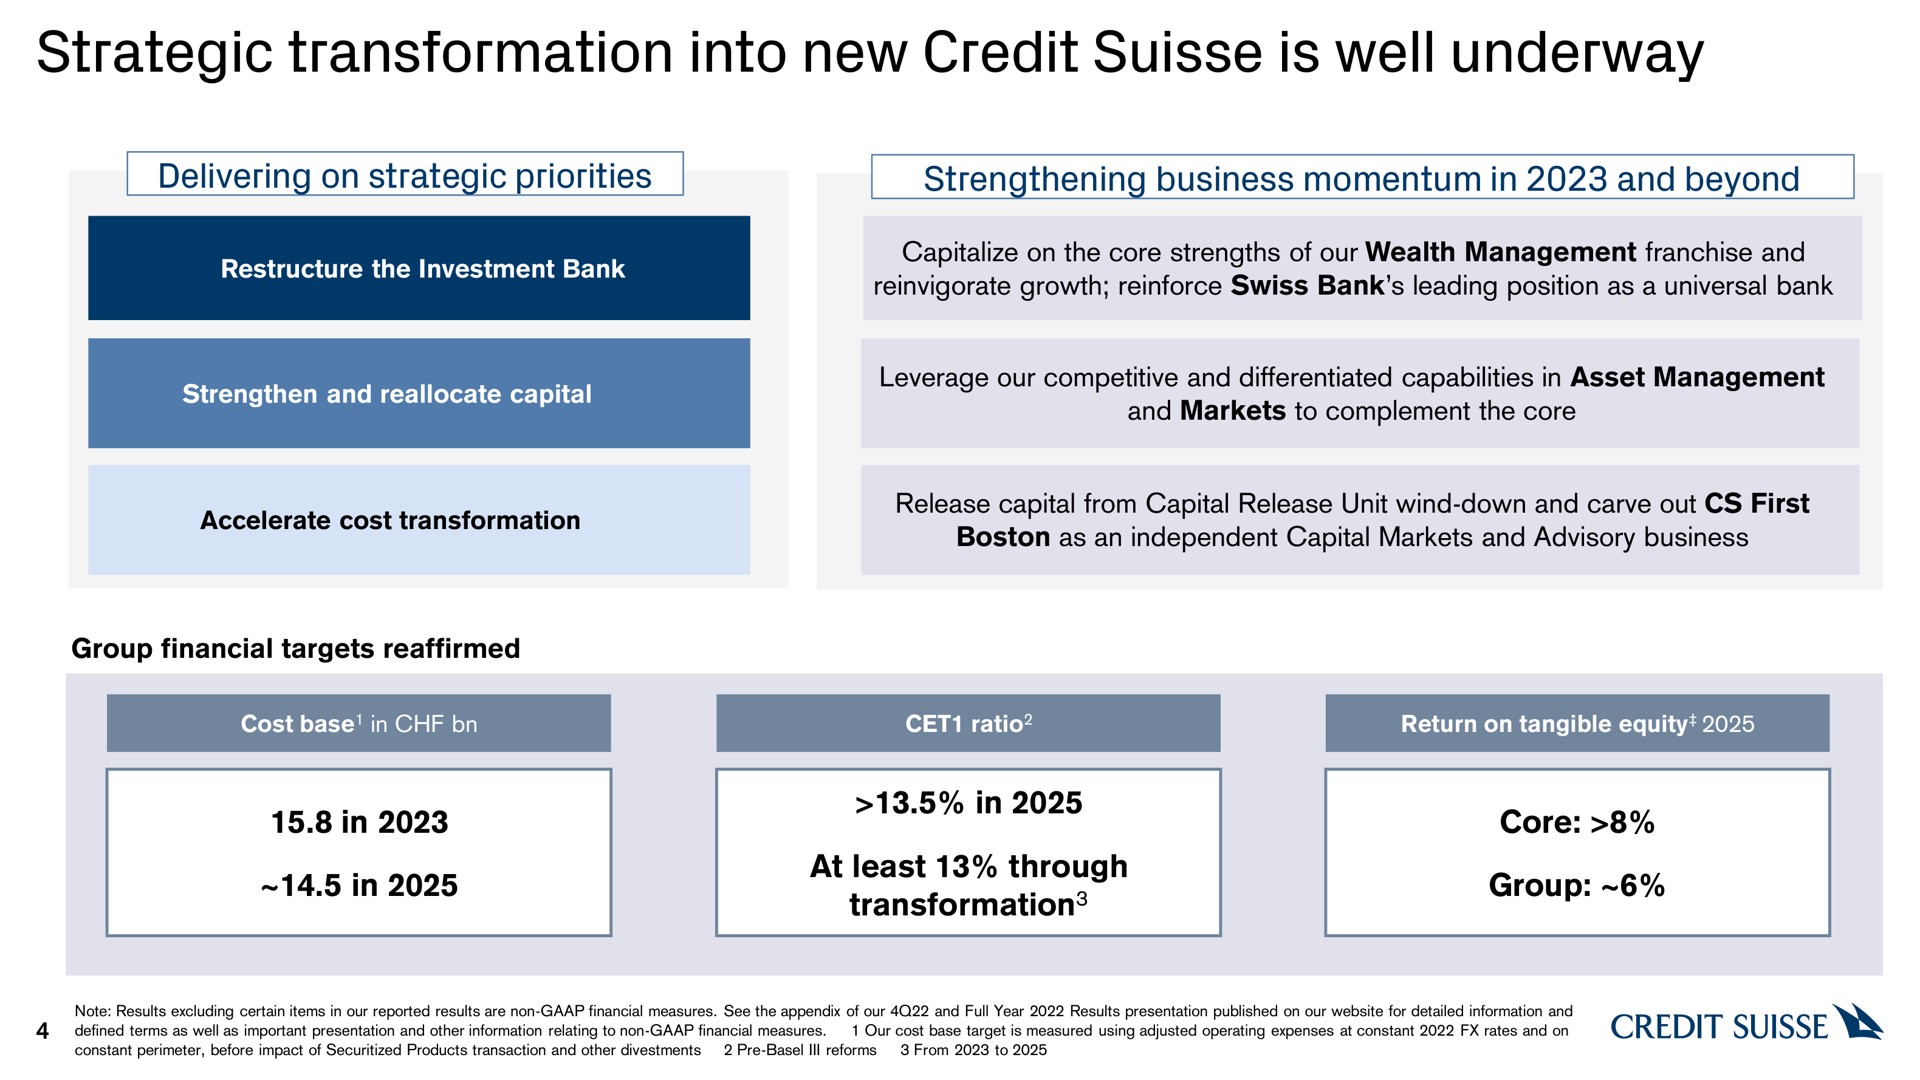 strategic transformation into new credit is well underway in a in core | Credit Suisse